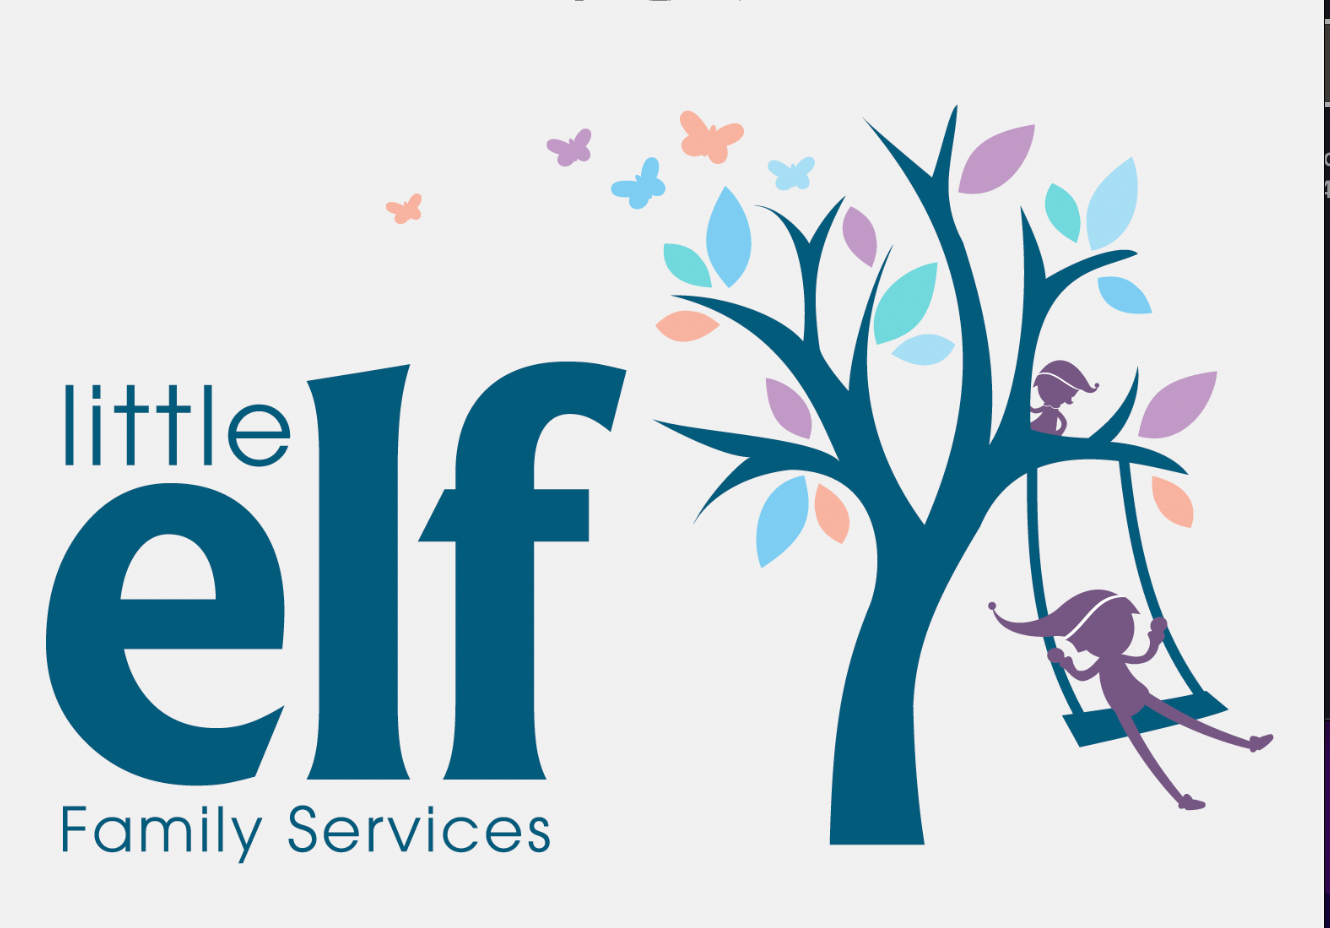 Little Elf Family Services image